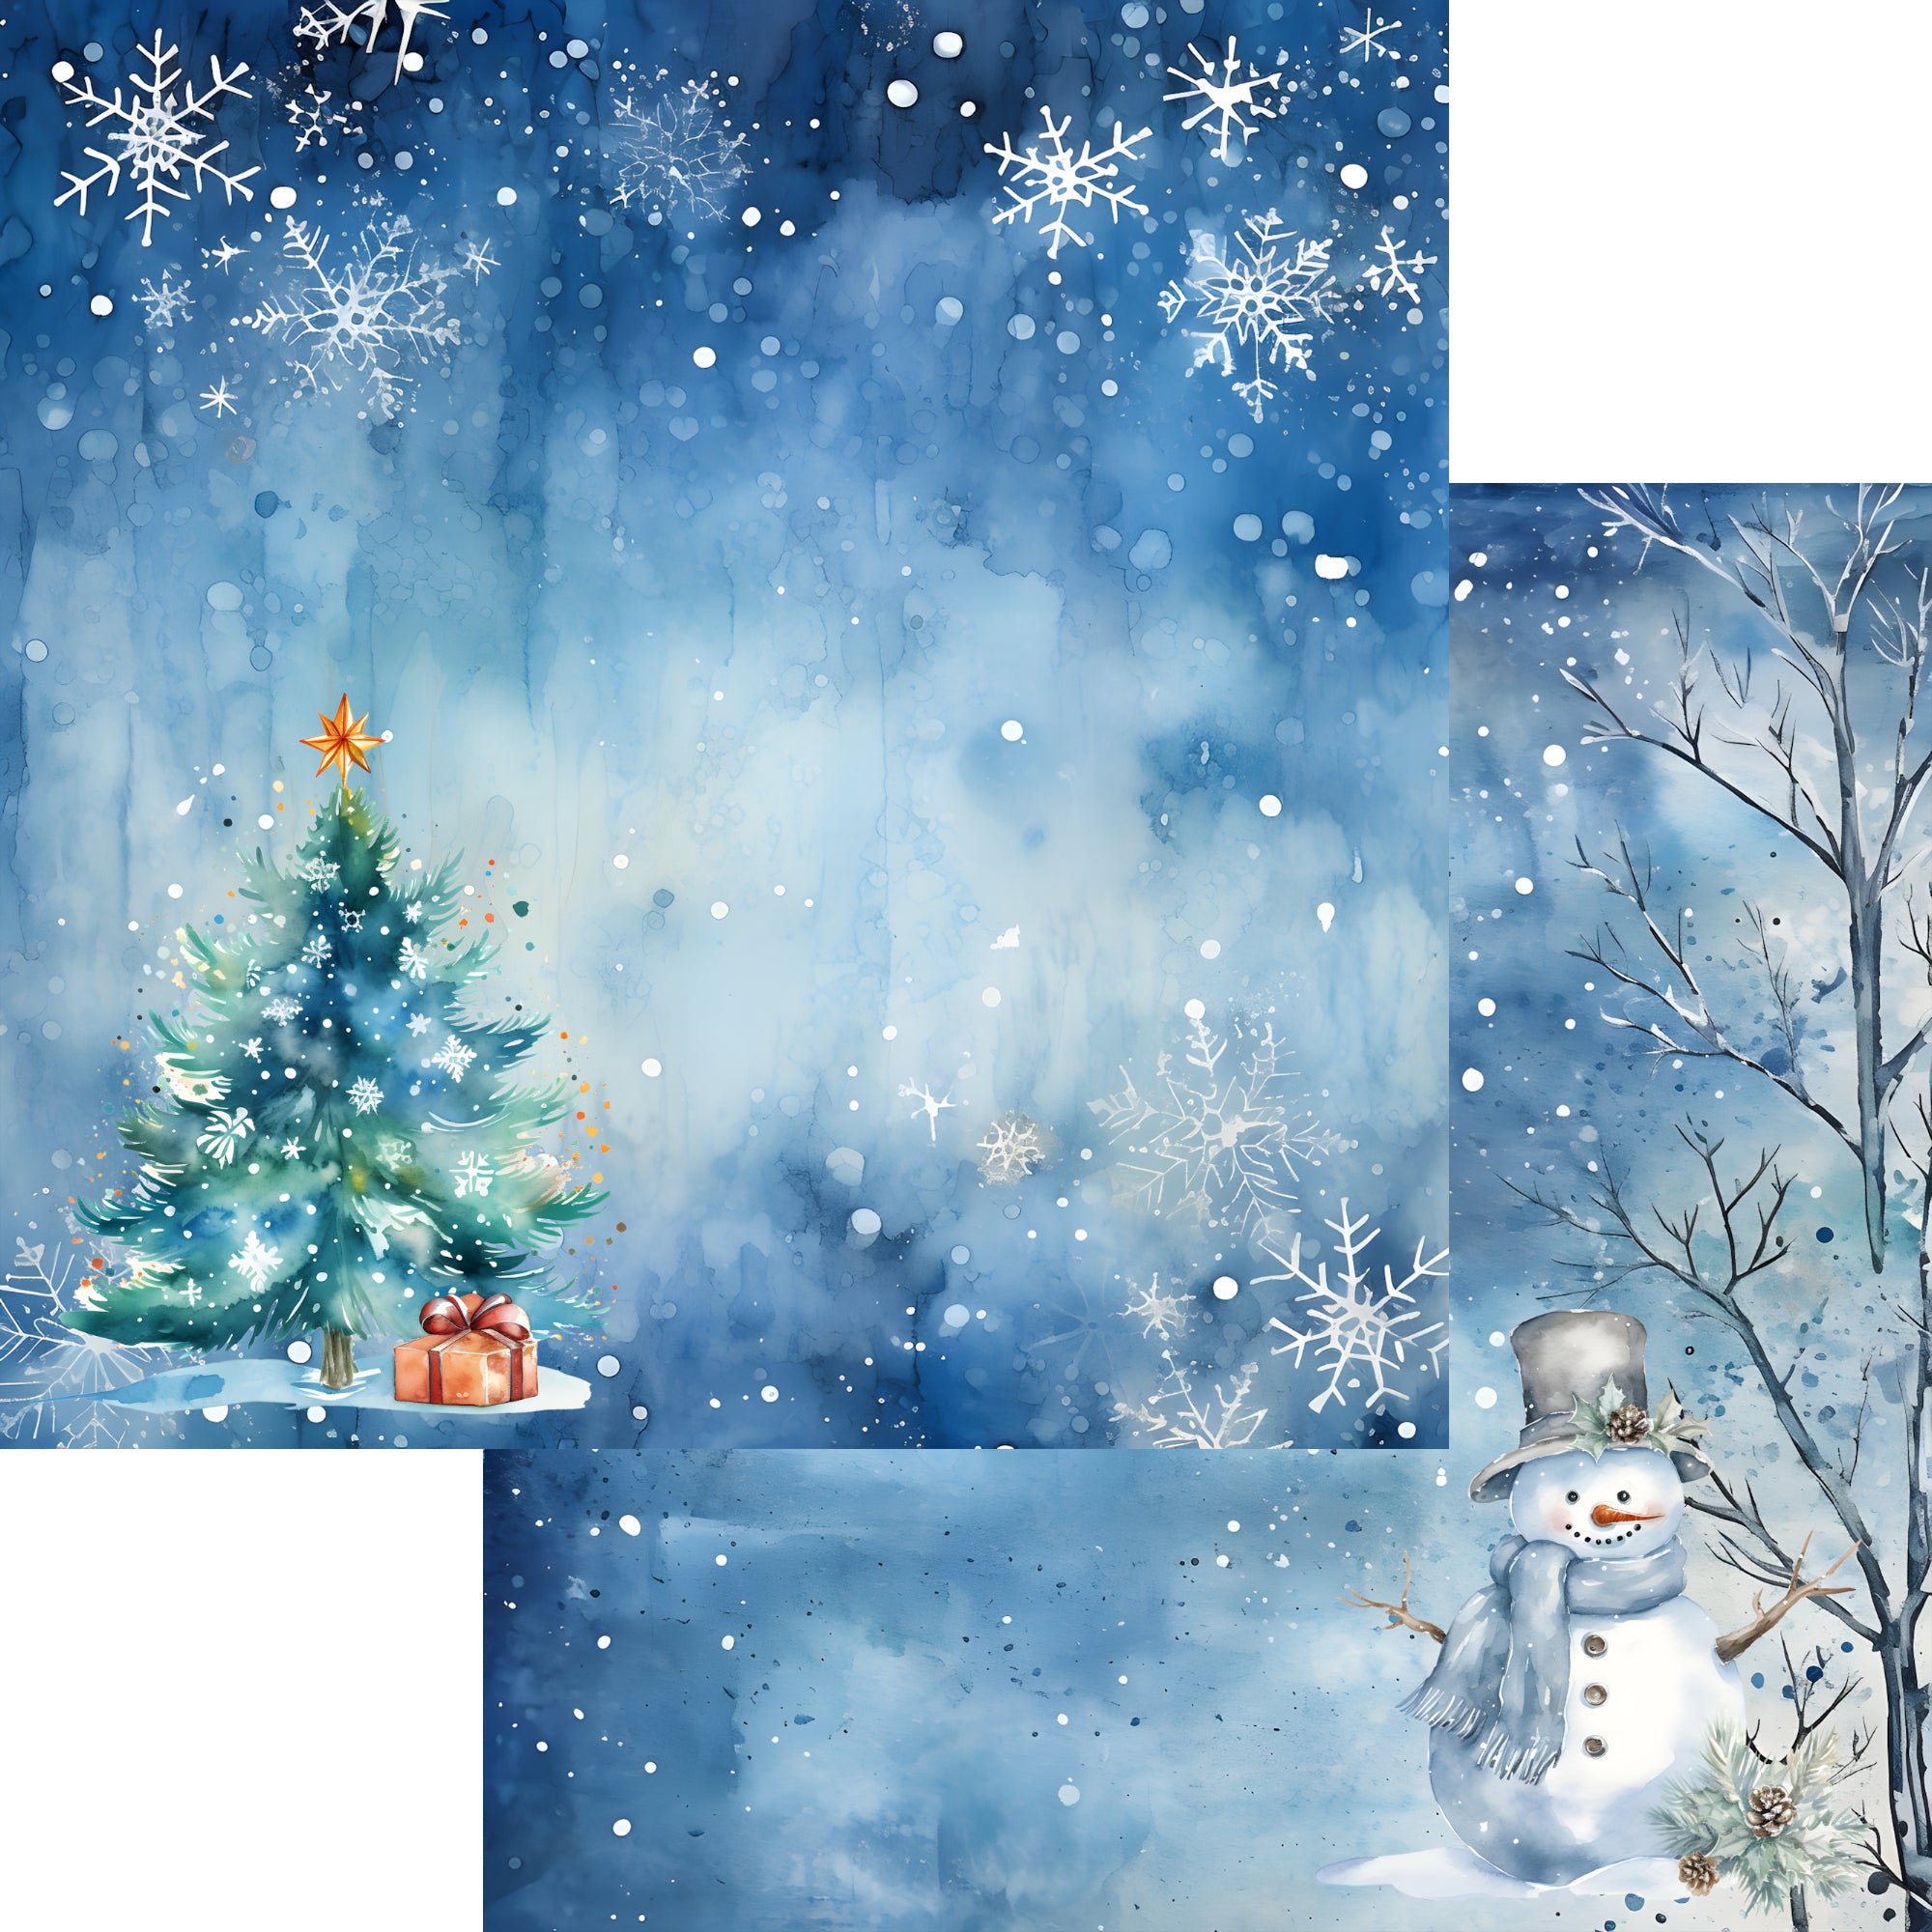 Wonderful Winter 12 x 12 Scrapbook Collection Kit by SSC Designs